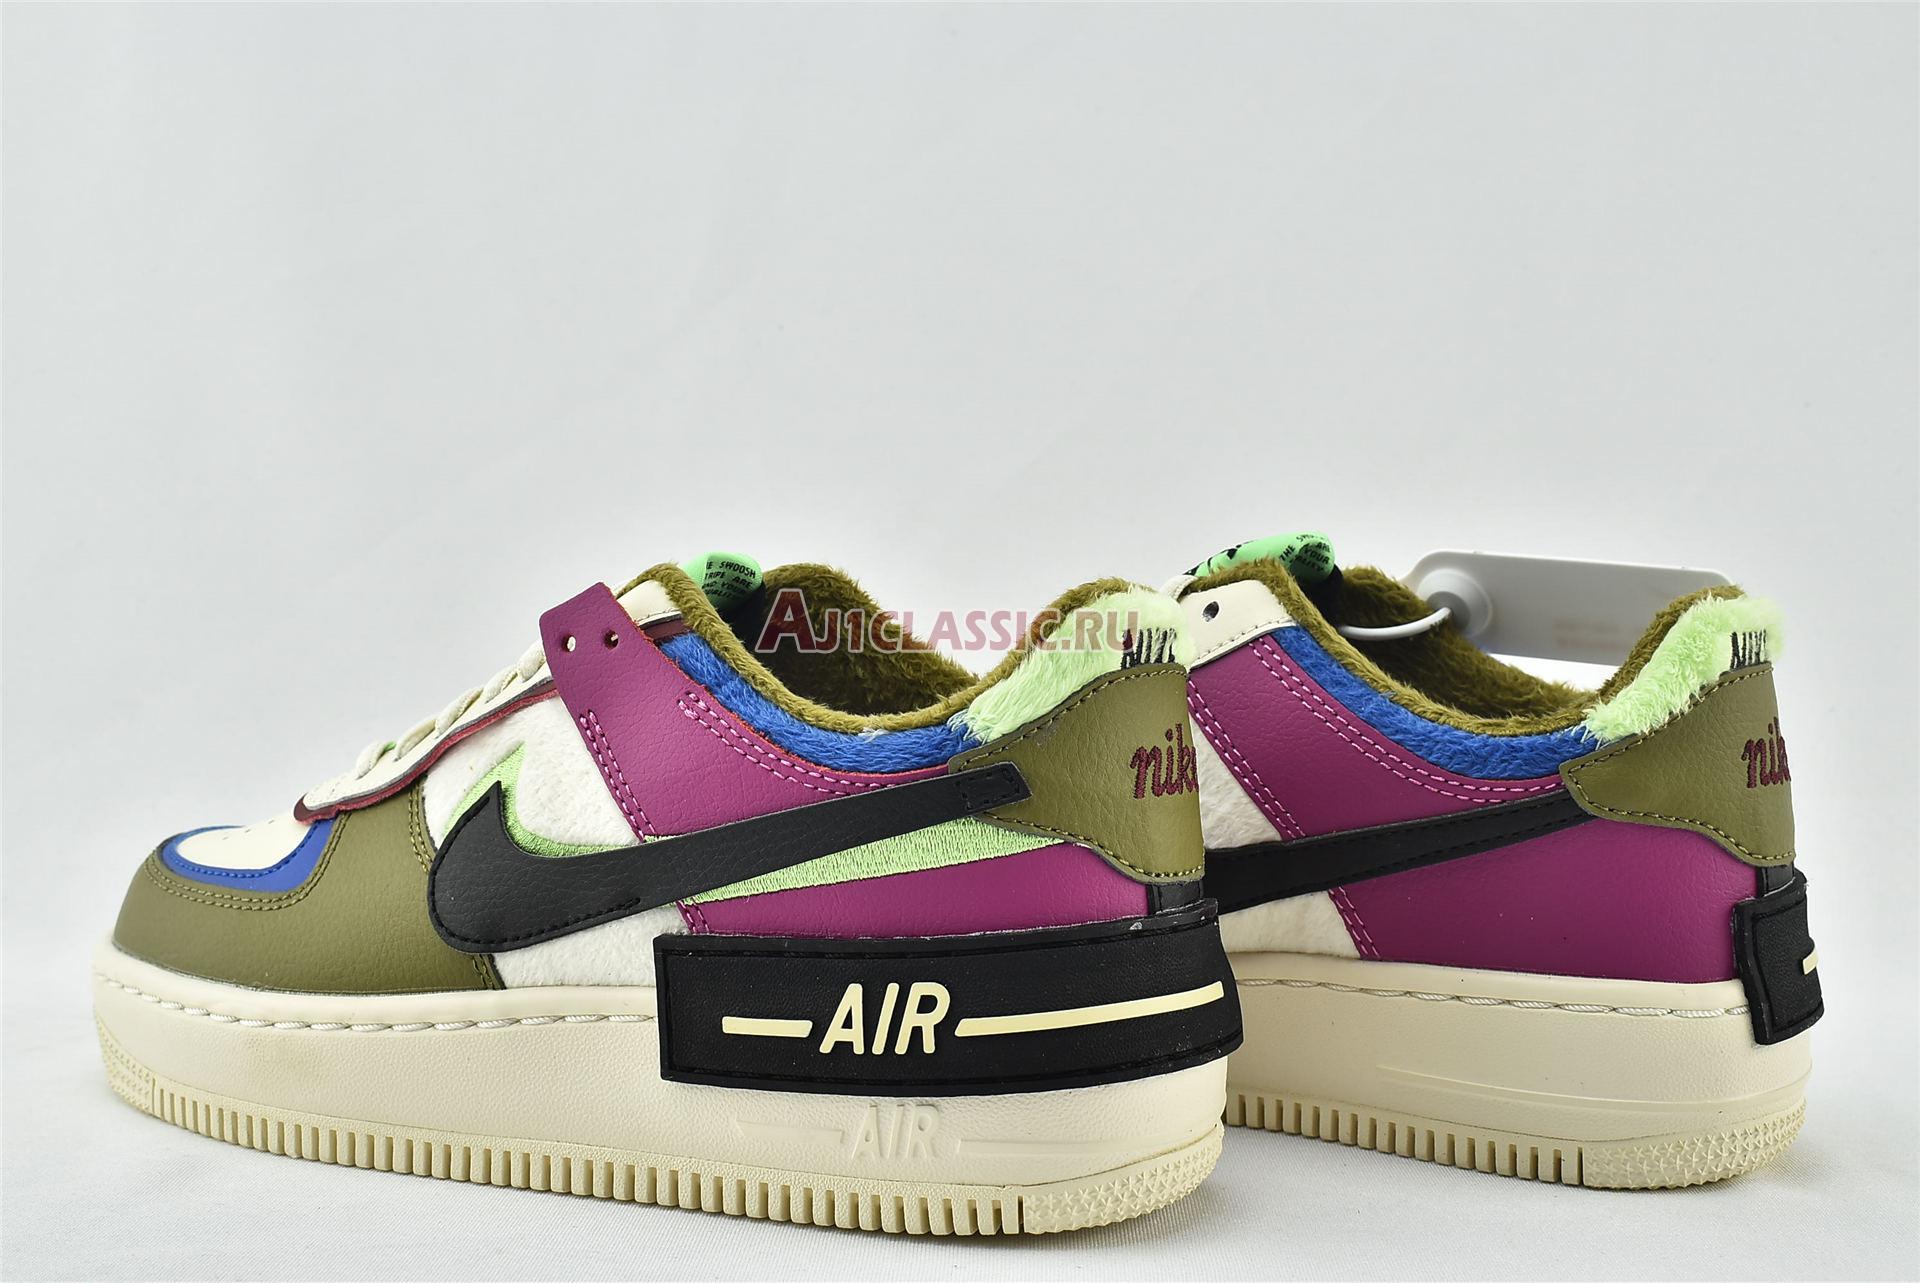 Nike Wmns Air Force 1 Shadow SE "Cactus Flower" CT1985-500